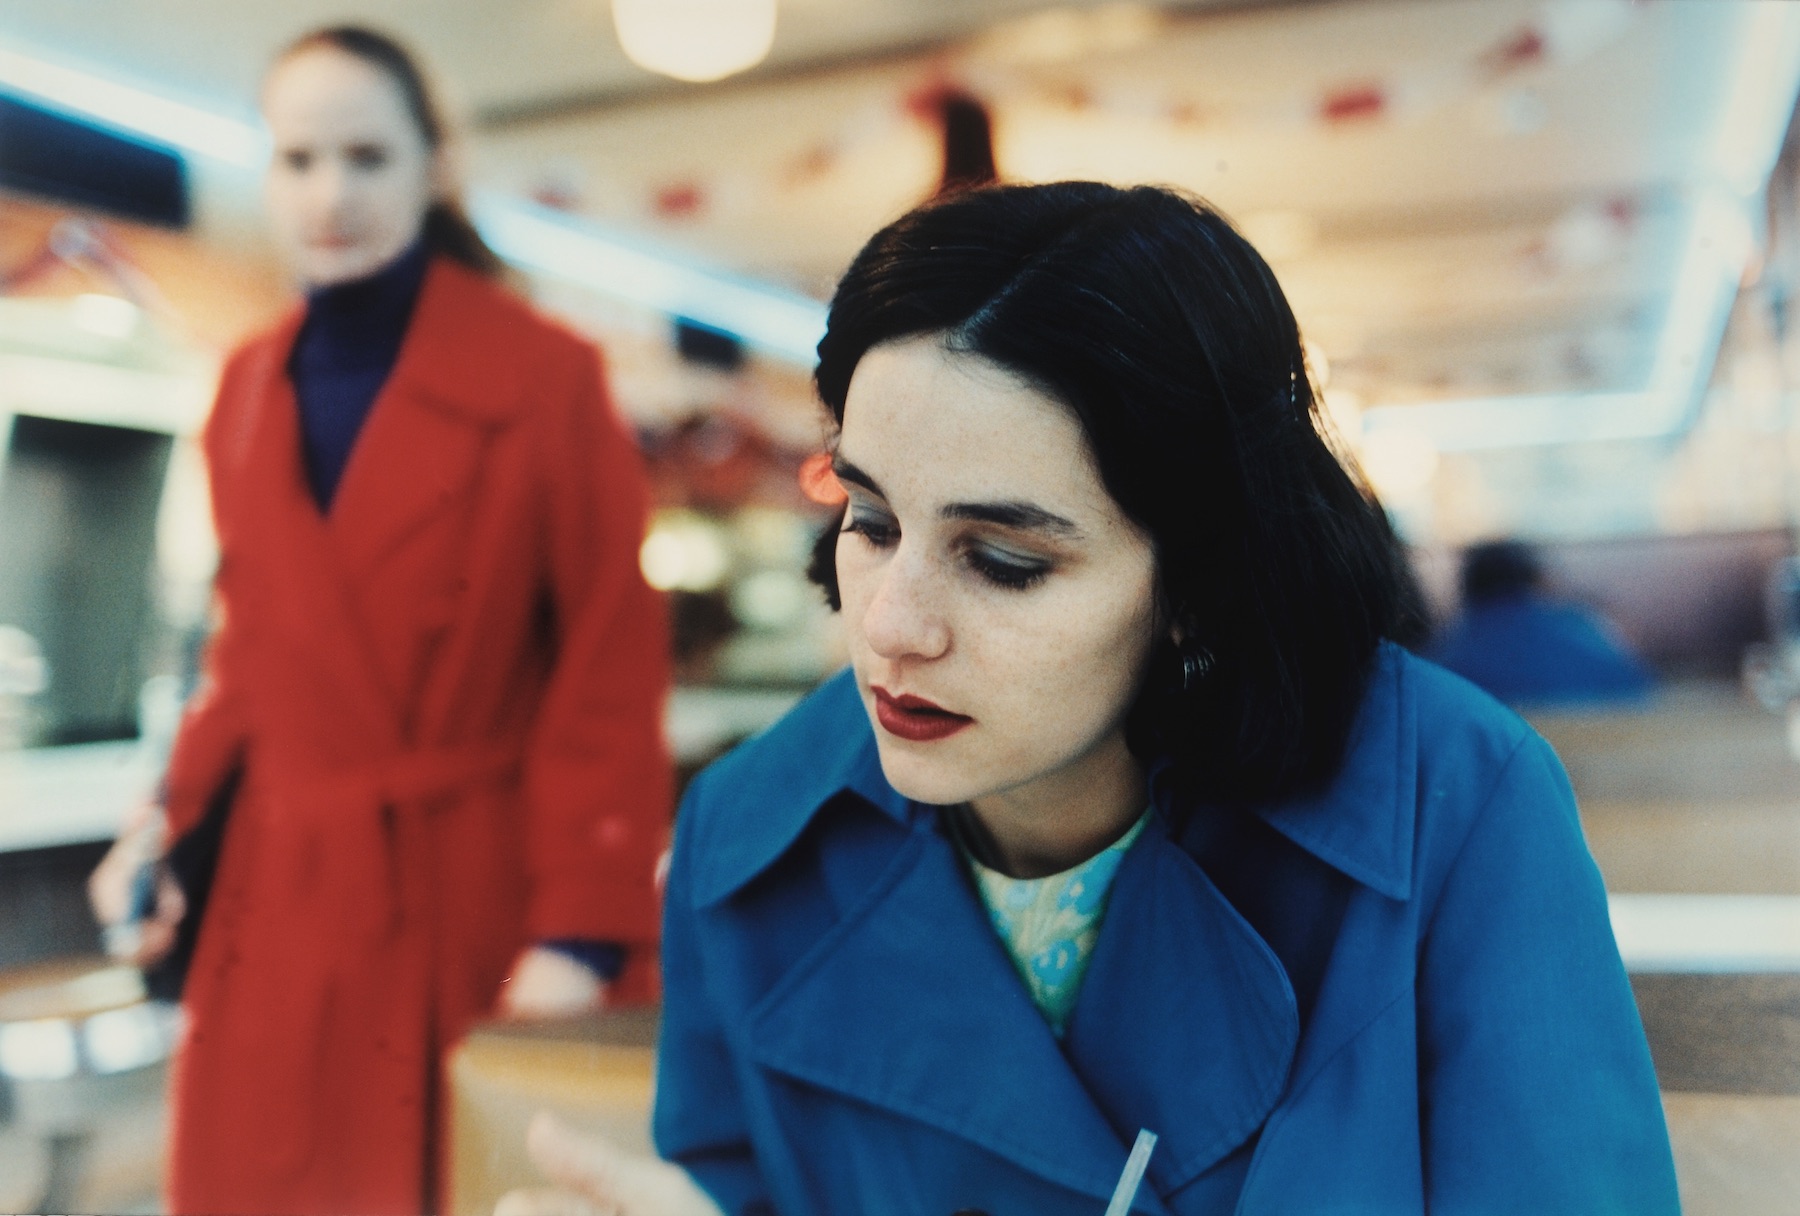 Two women, in blue and red coats